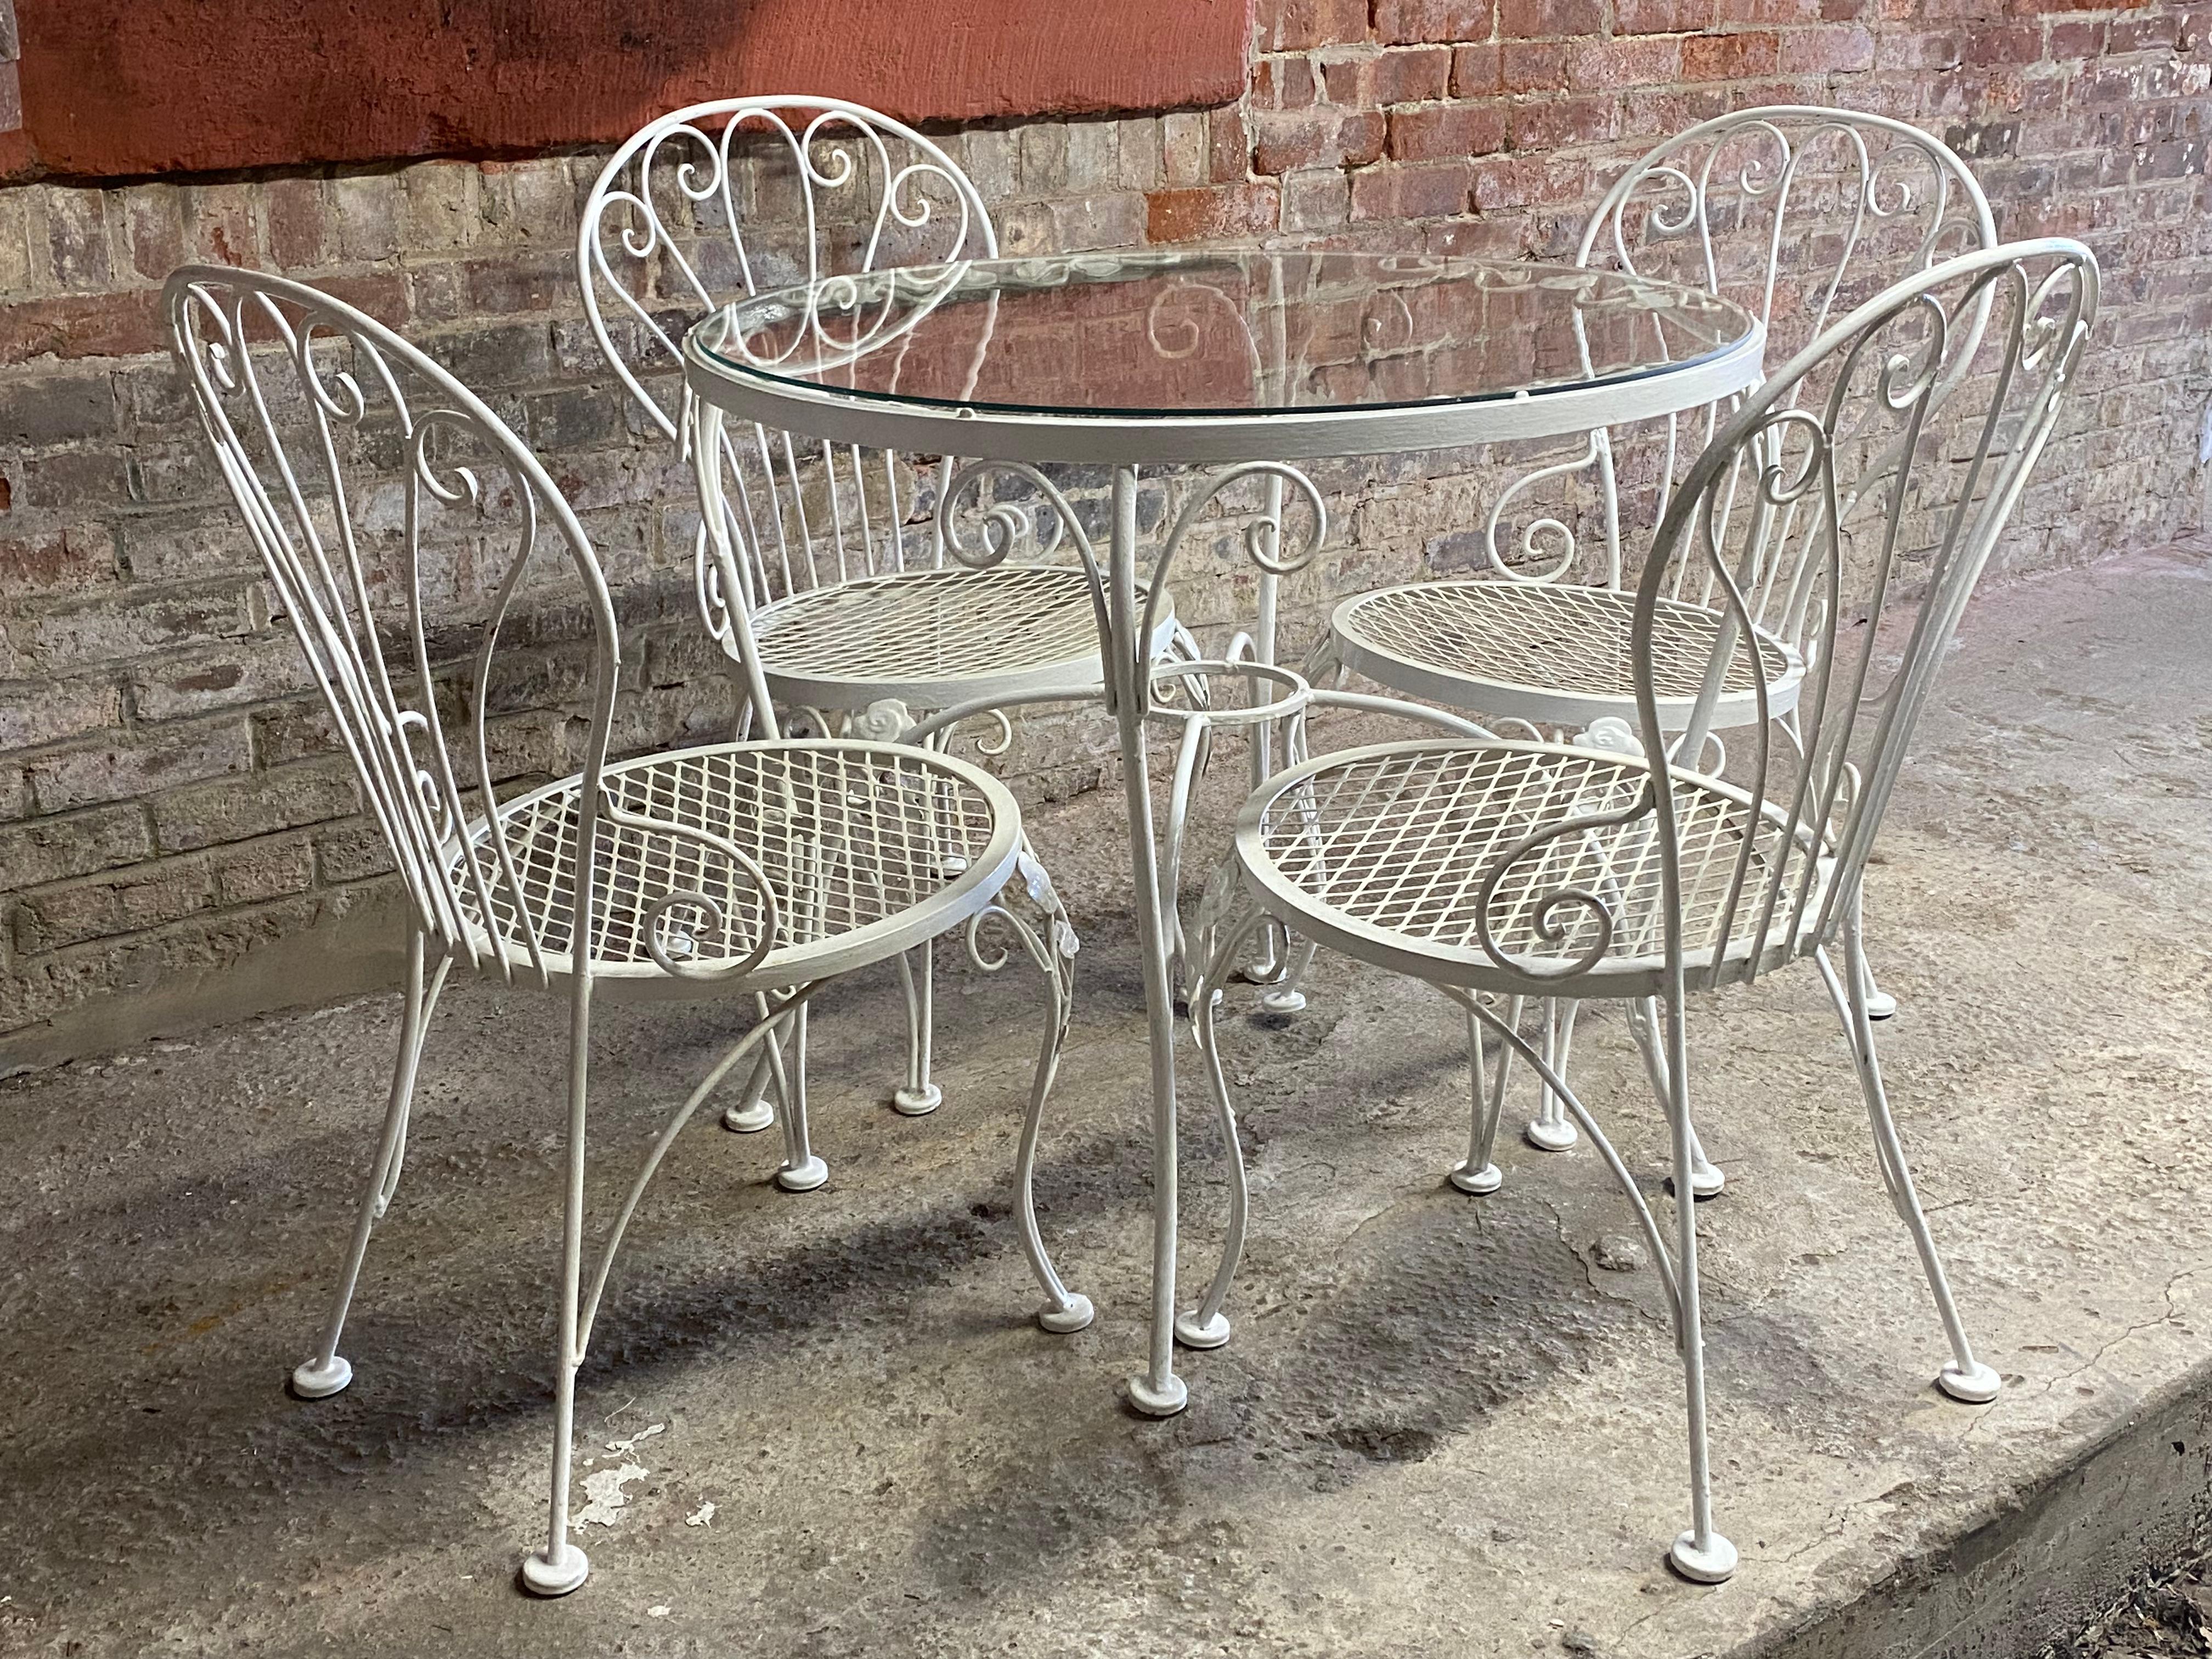 Woodard outdoor patio set that includes four scrolled chairs with mesh seats and a round glass top table. Circa 1965-70. Floral and scroll decoration. Good overall condition. Minor scratches to the glass top. Multiple coats of paint. Underside of